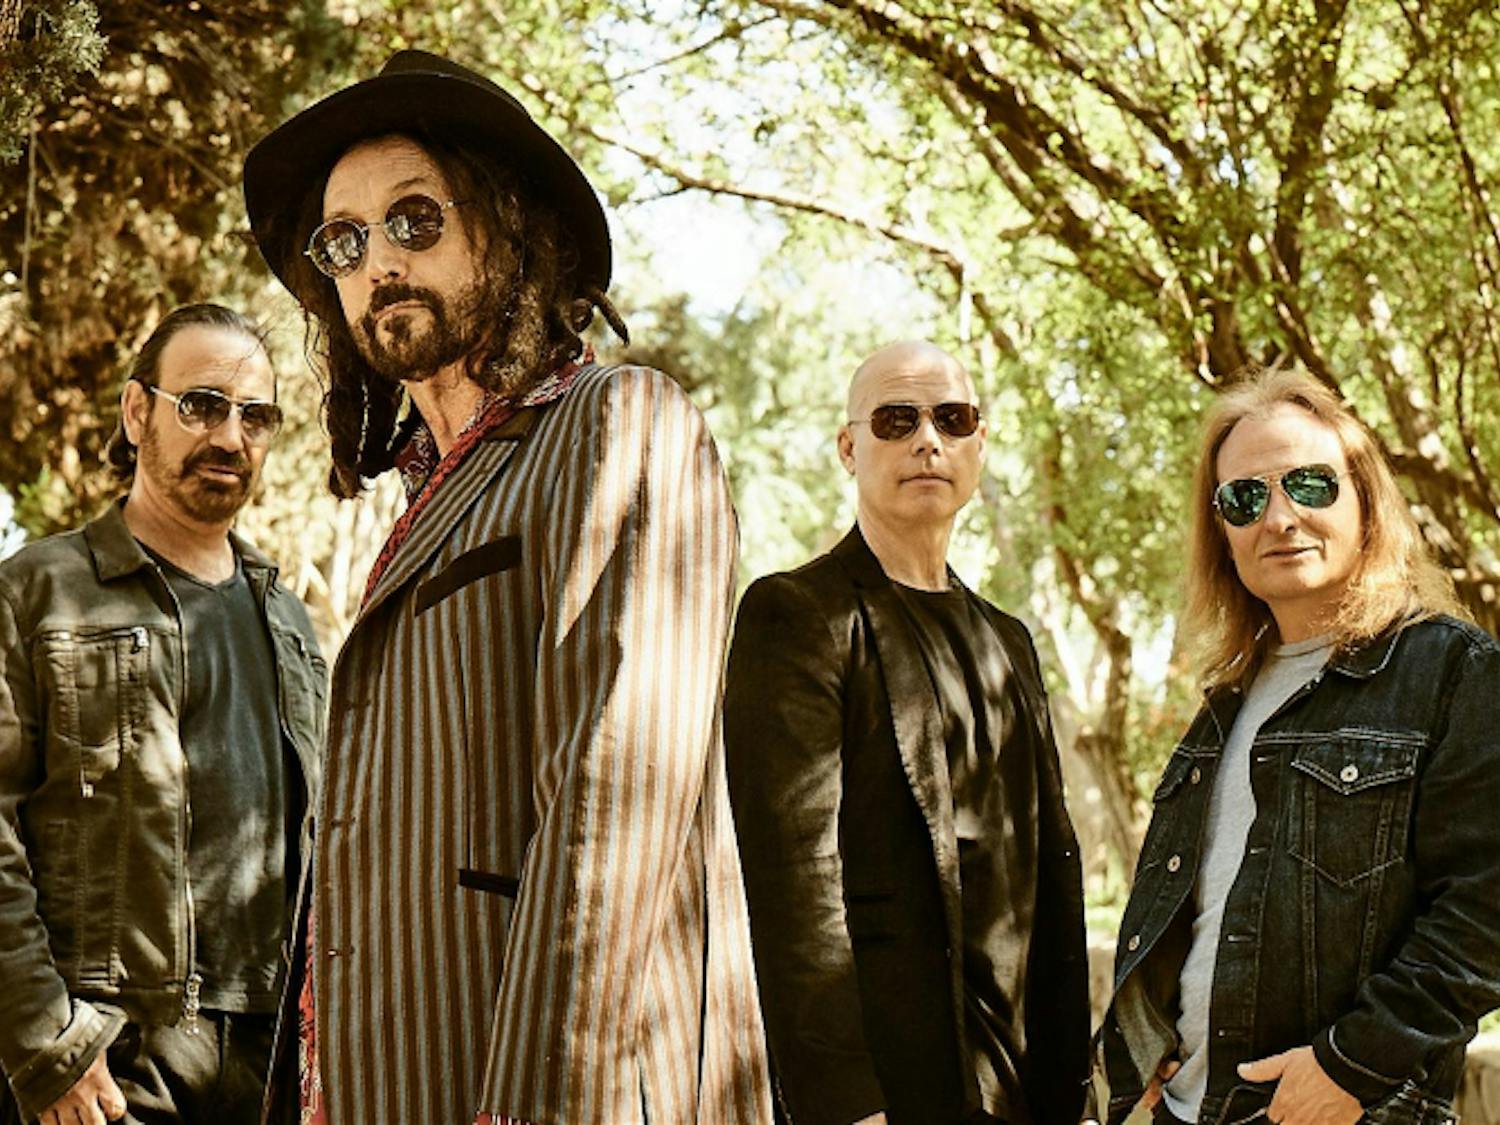 The band, featuring legendary performer Mike Campbell, is coming to the High Dive April 26. 